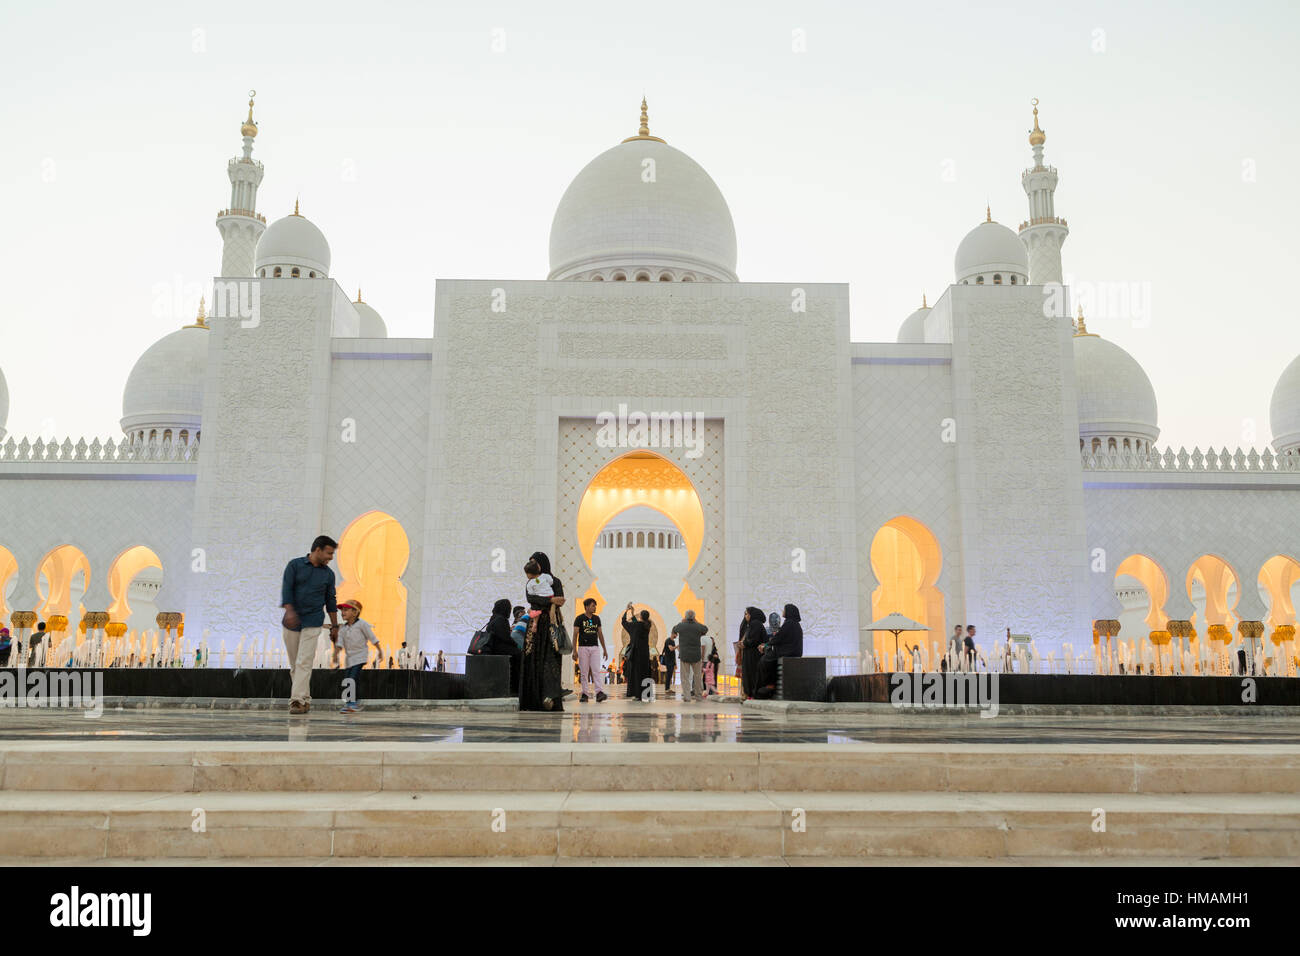 Amazing Mosque. Sheikh Zayed Grand Mosque at sunset time (Abu-Dhabi, UAE). Sheikh Zayed. Abu Dhabi Stock Photo